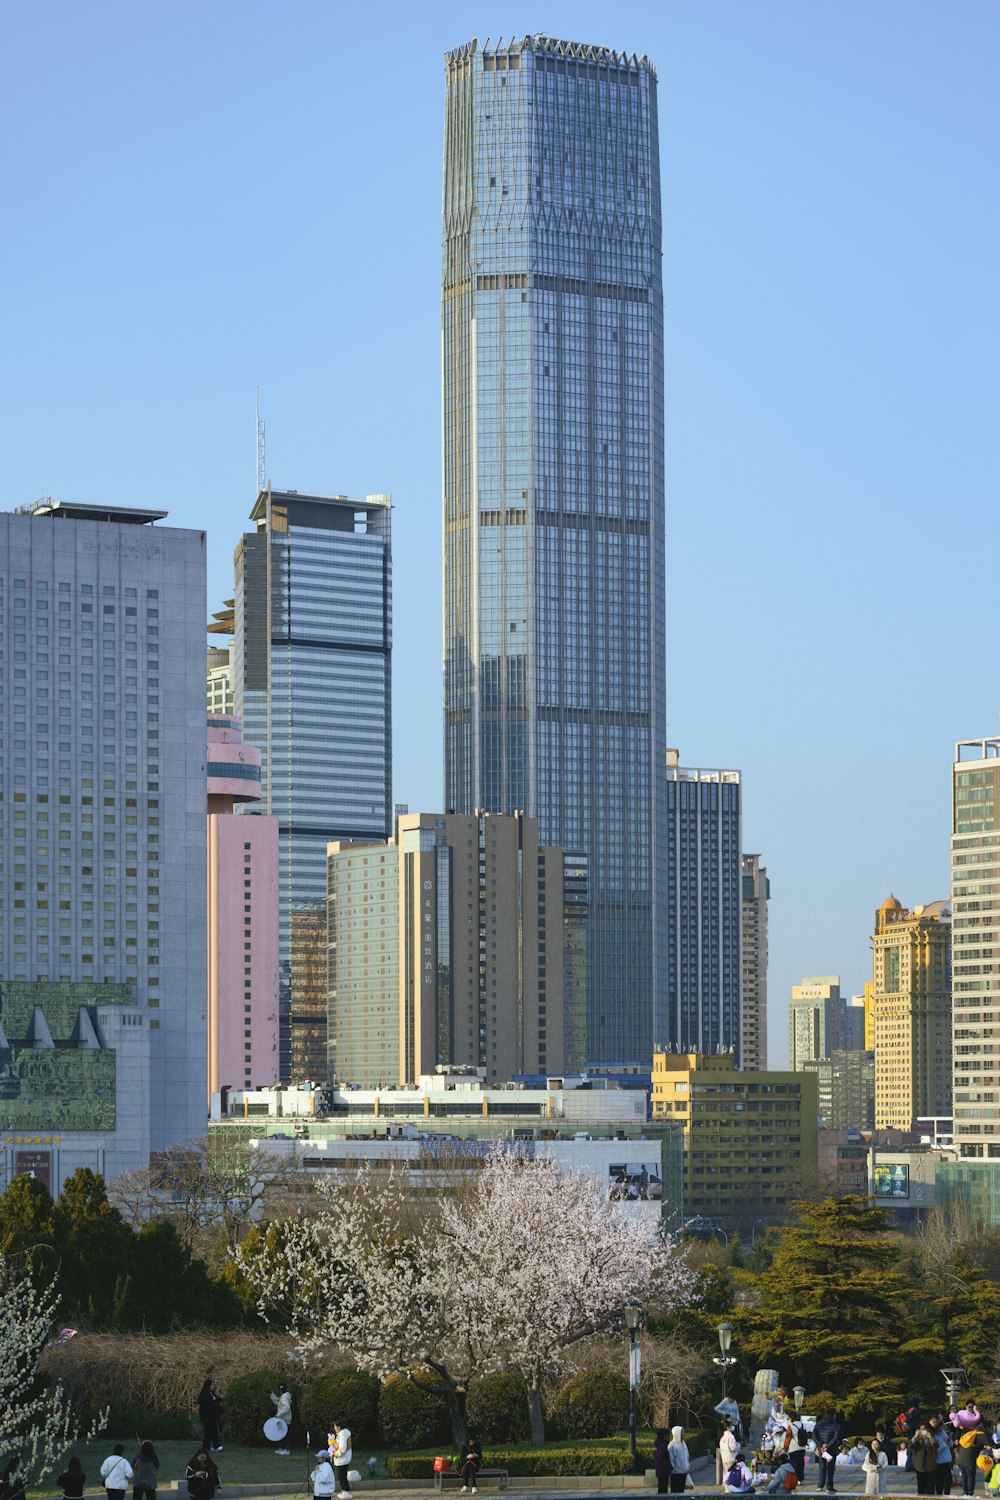 a group of people sitting in a park in front of tall buildings